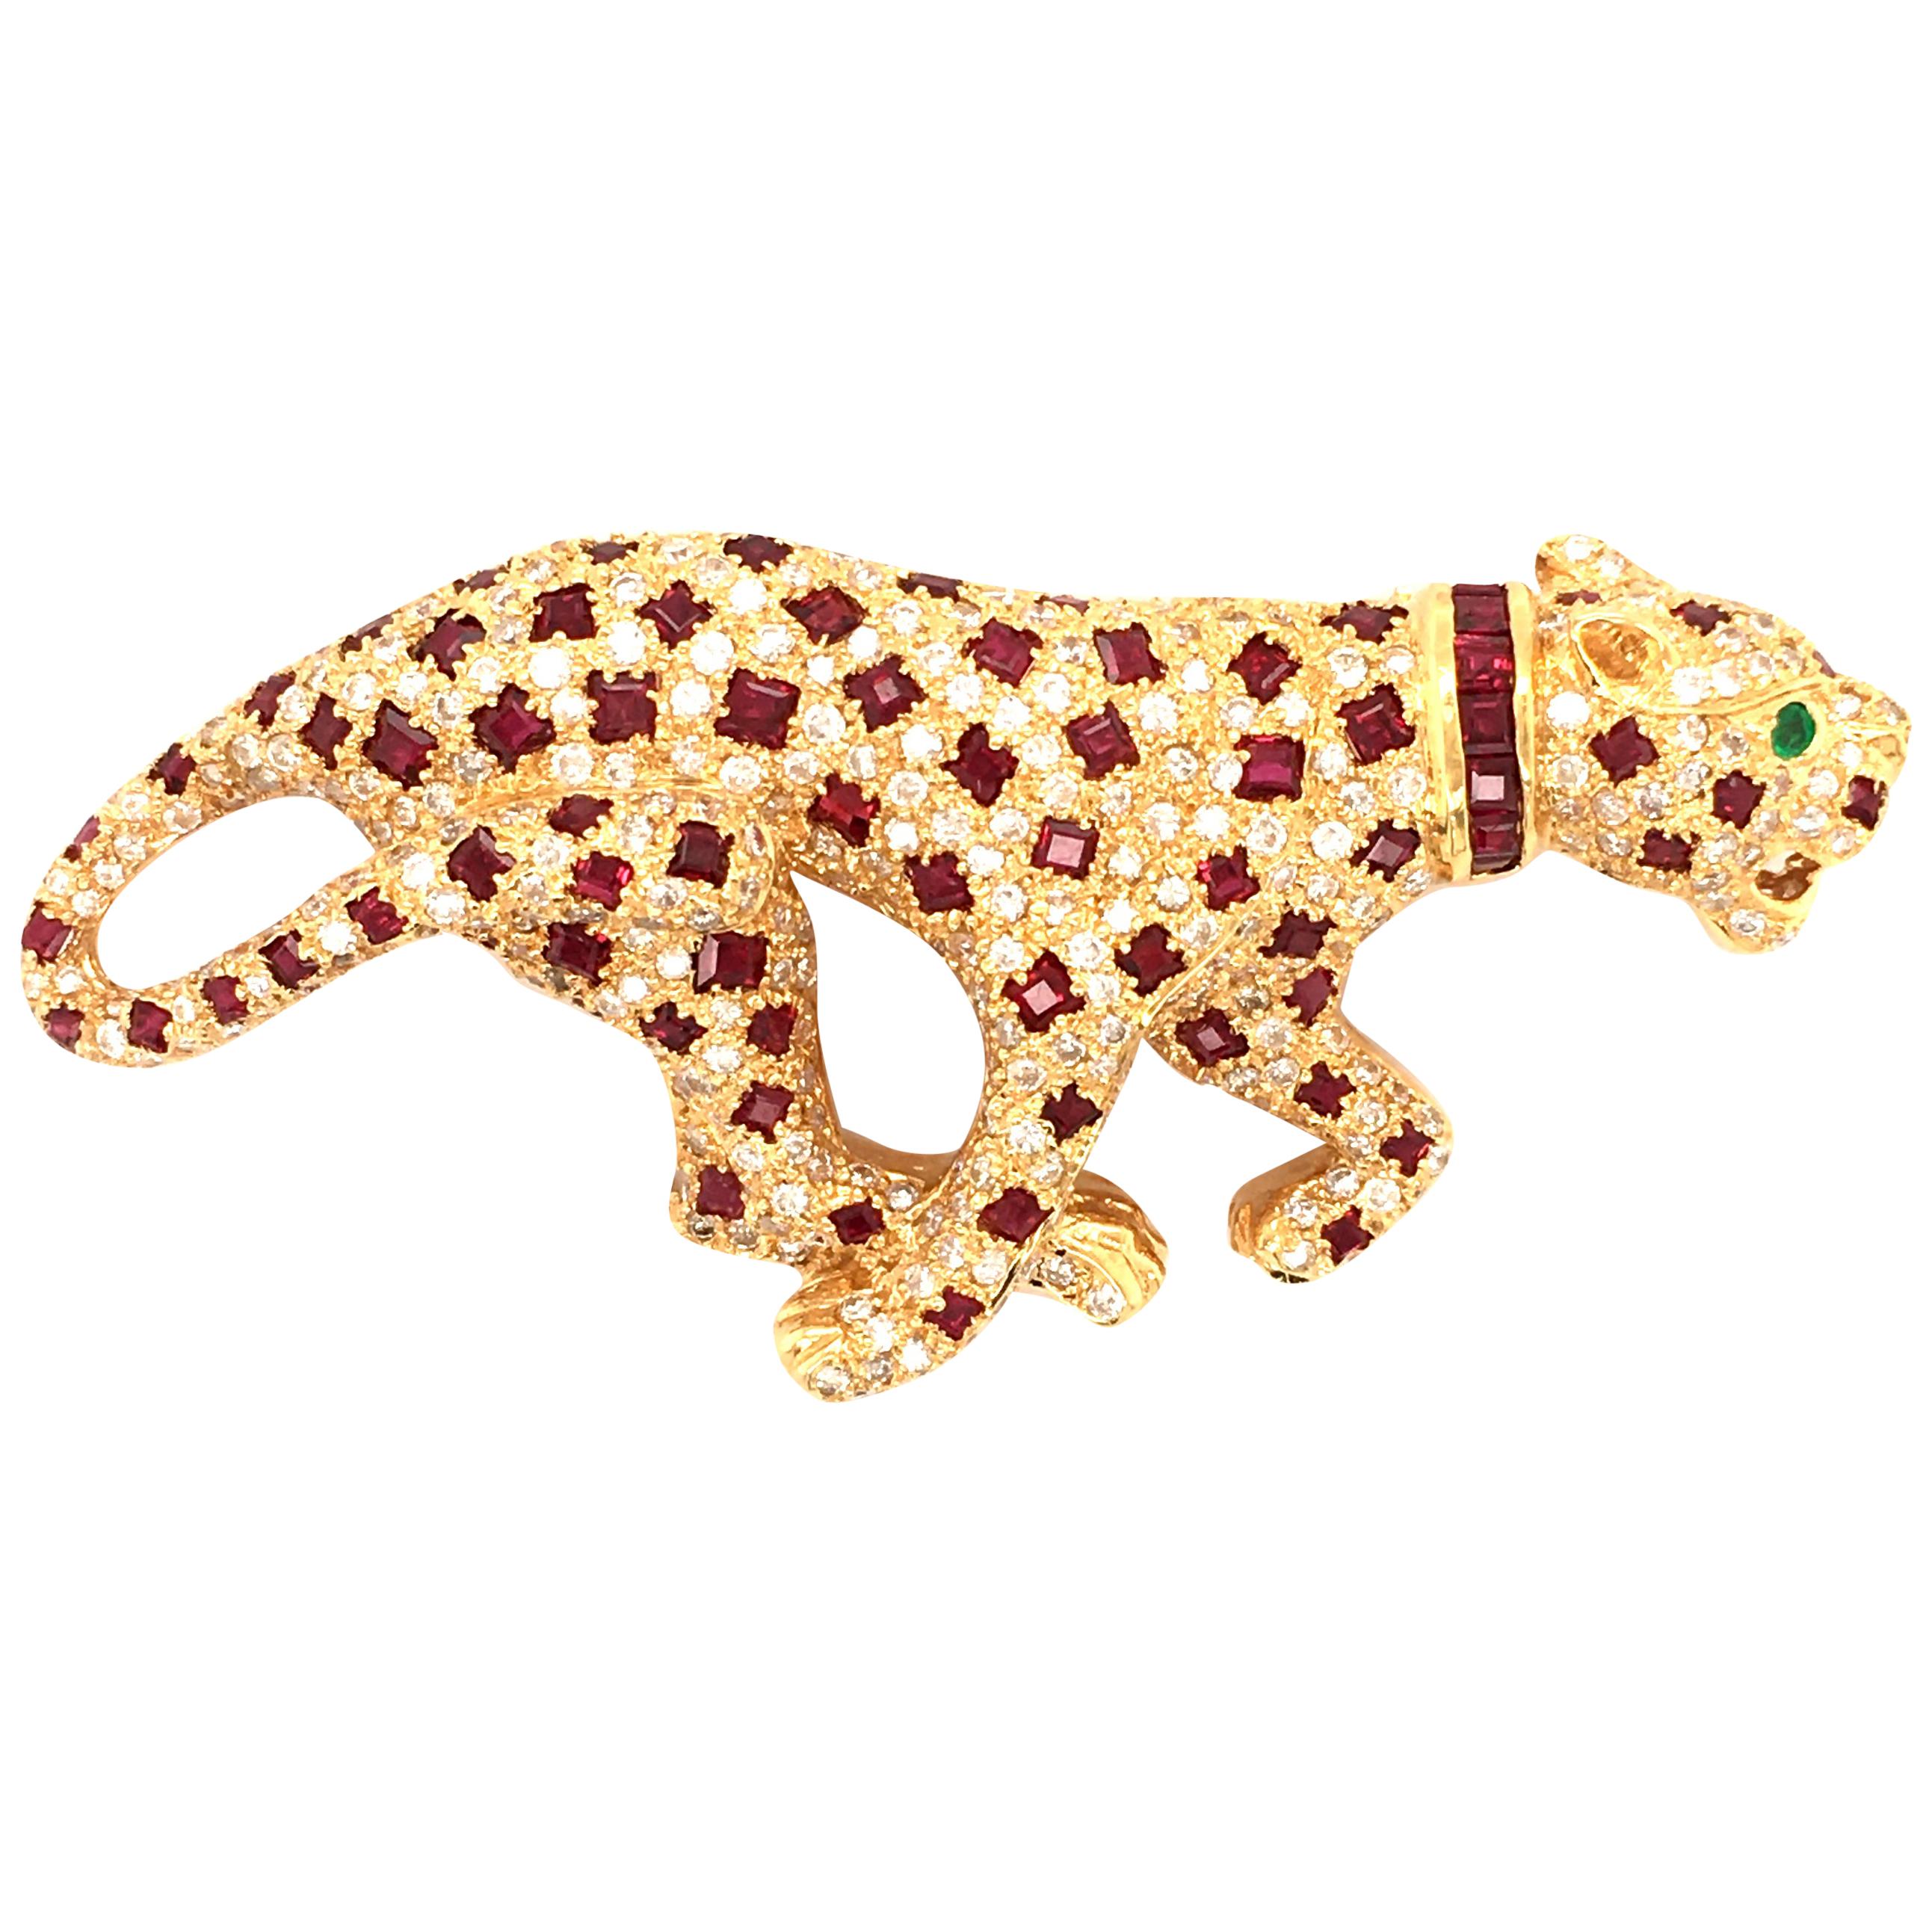 Unique Panther Brooch with Rubies and Diamonds in 18 Karat Yellow Gold